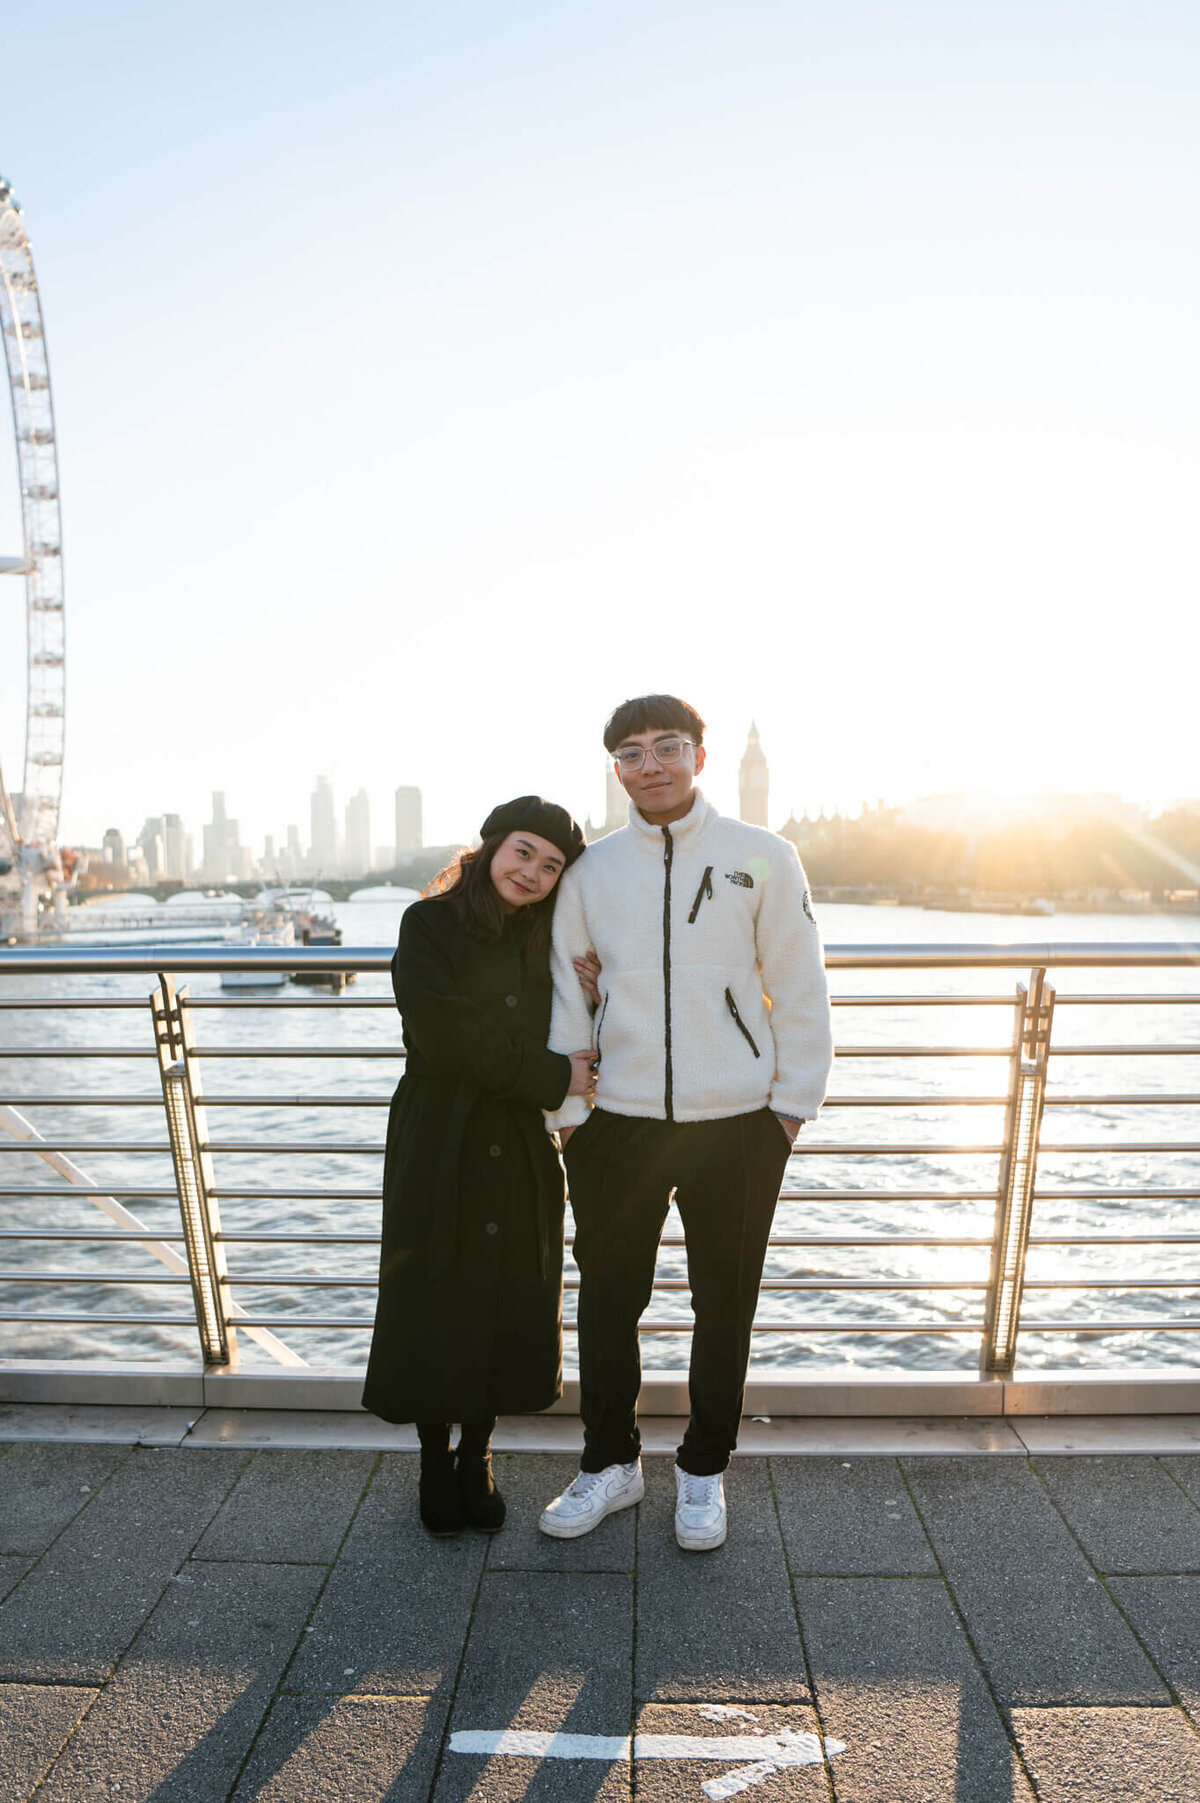 Chloe Bolam - London Engagement and Couple Photographer - Big Ben London Eye Engagement - London Golden Hour Couple Photoshoot - S & L - 10.12.22 - 1